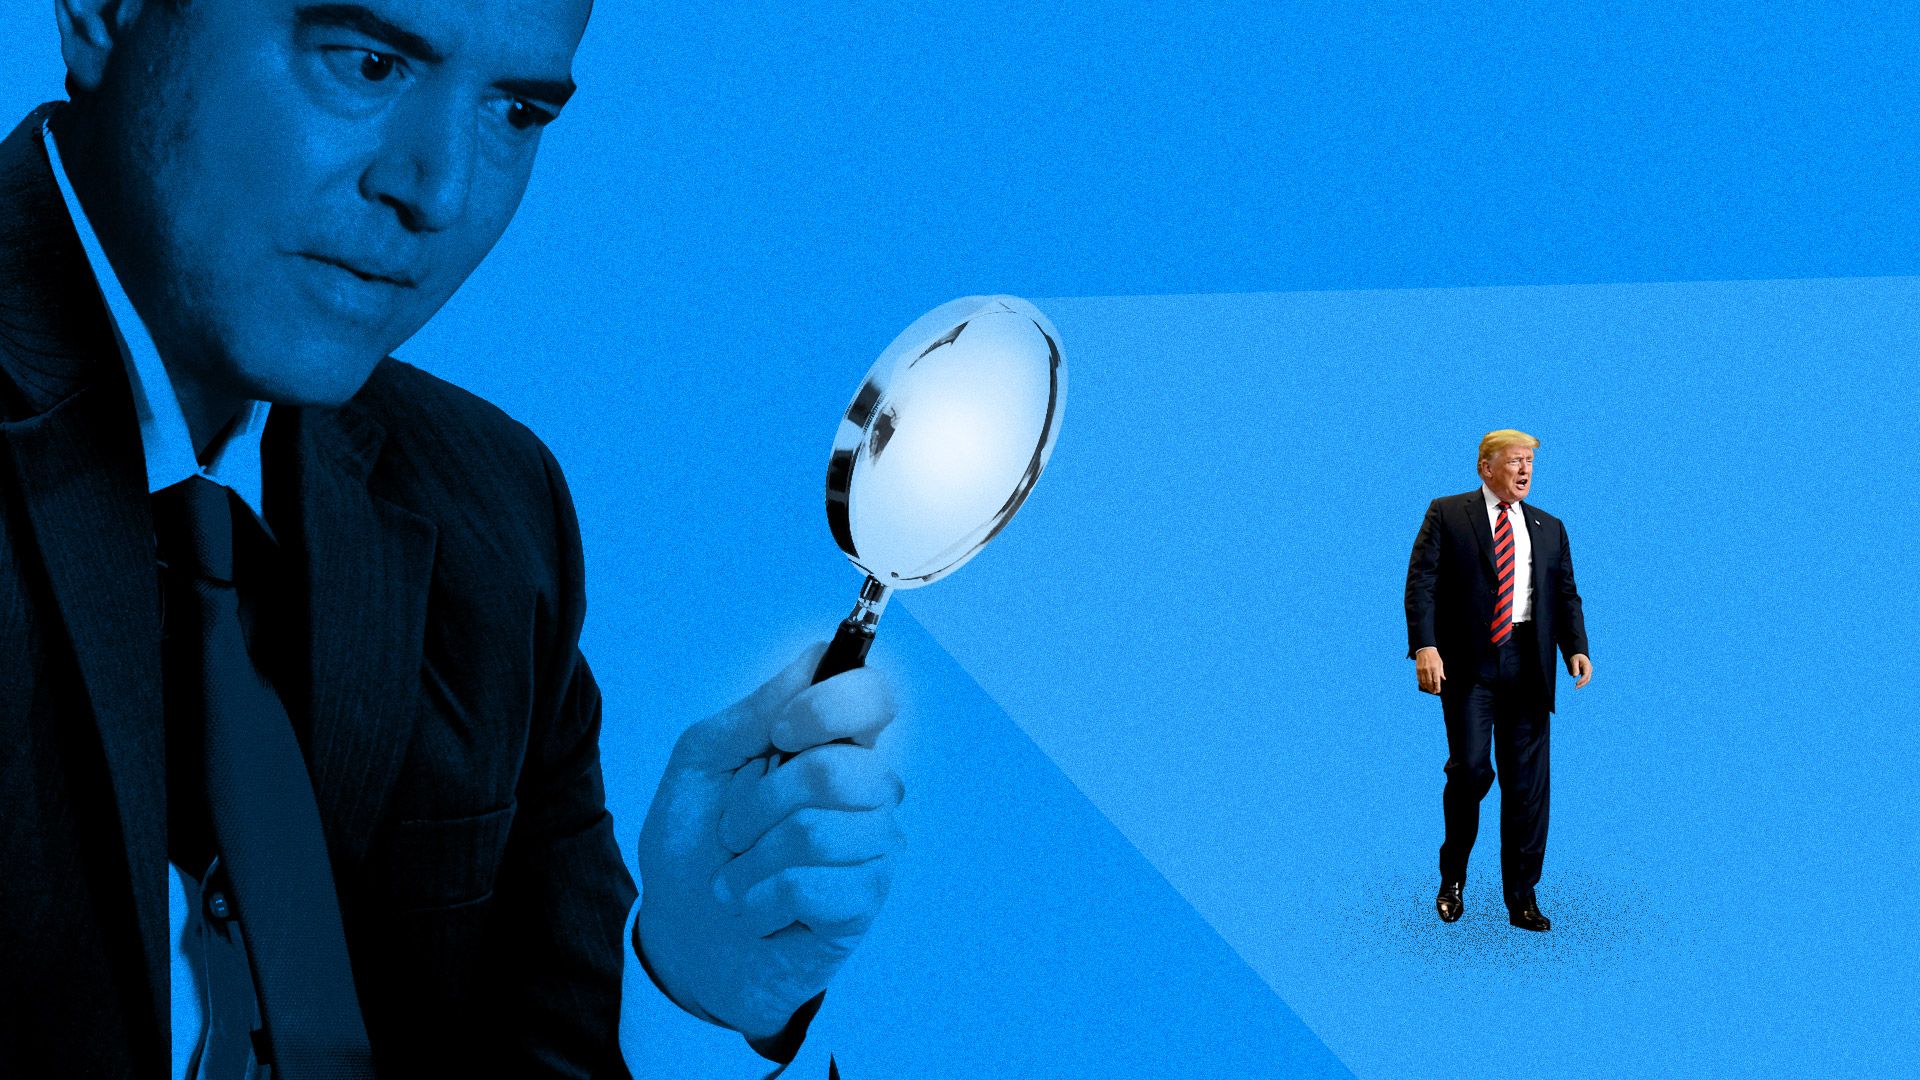 This blue illustration features Adam Schiff with a hand microscope pointed at Donald Trump